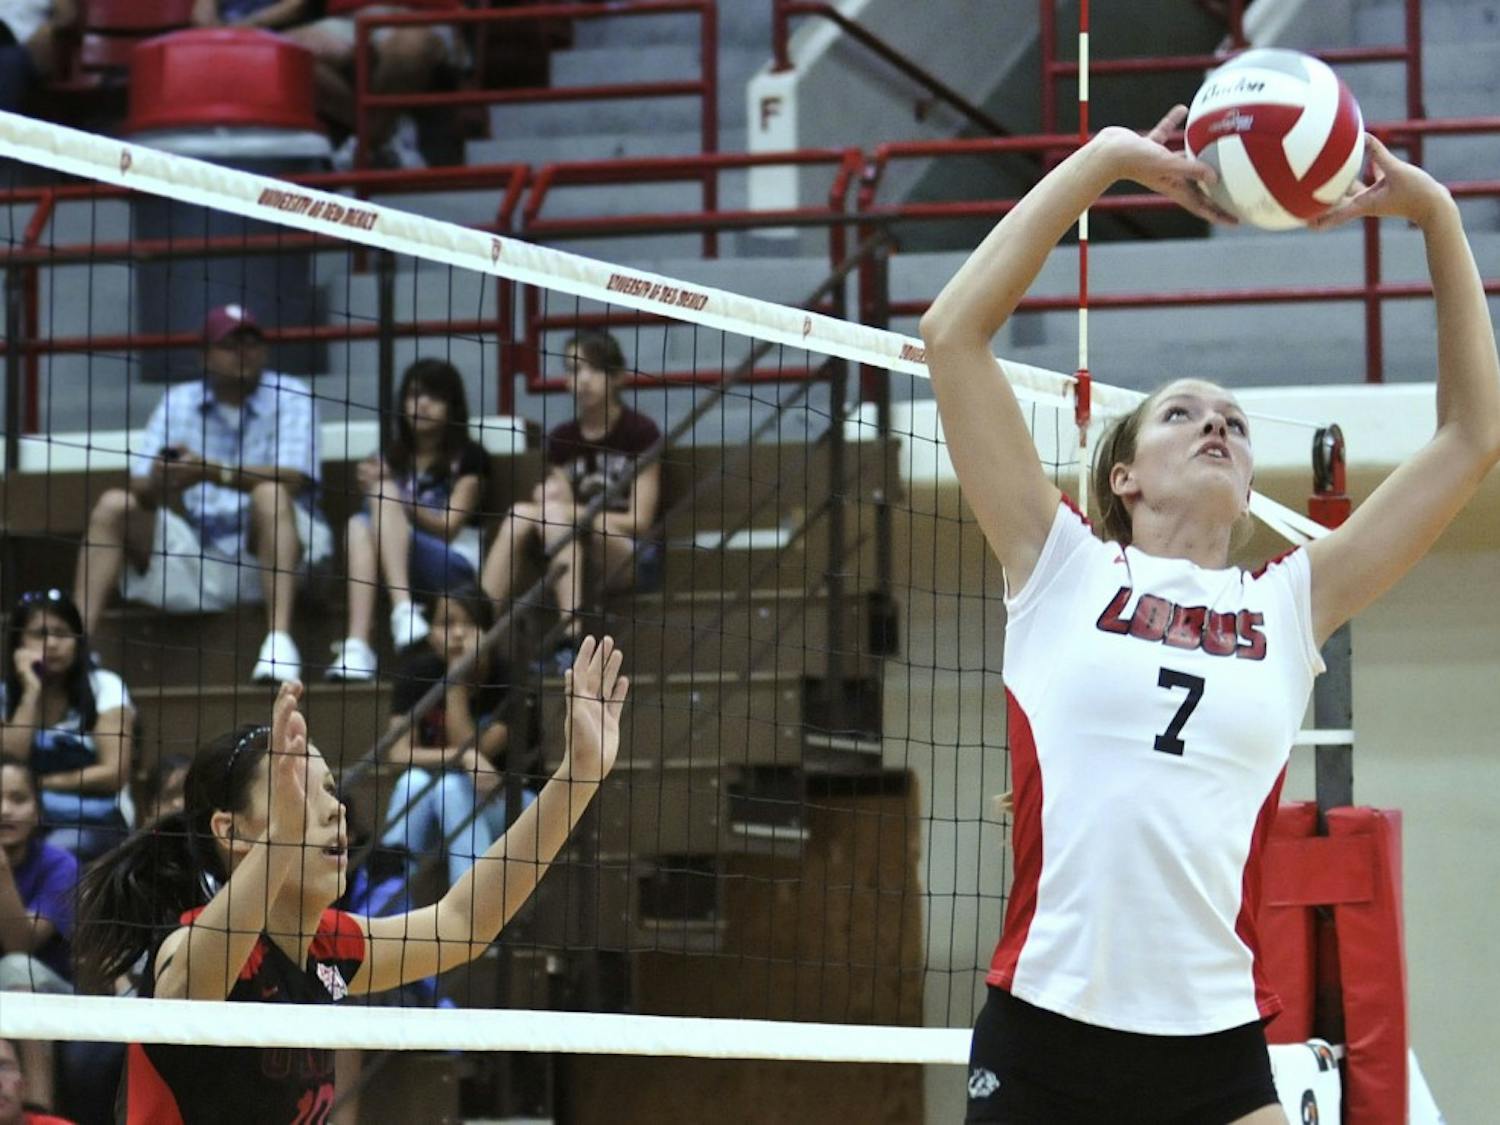 	UNM’s Jade Michaelsen receives a pass during the Lobos 3-0 sweep of UNLV on Saturday at Johnson Center. The Lobos improve to 2-1 in Mountain West Conference play.